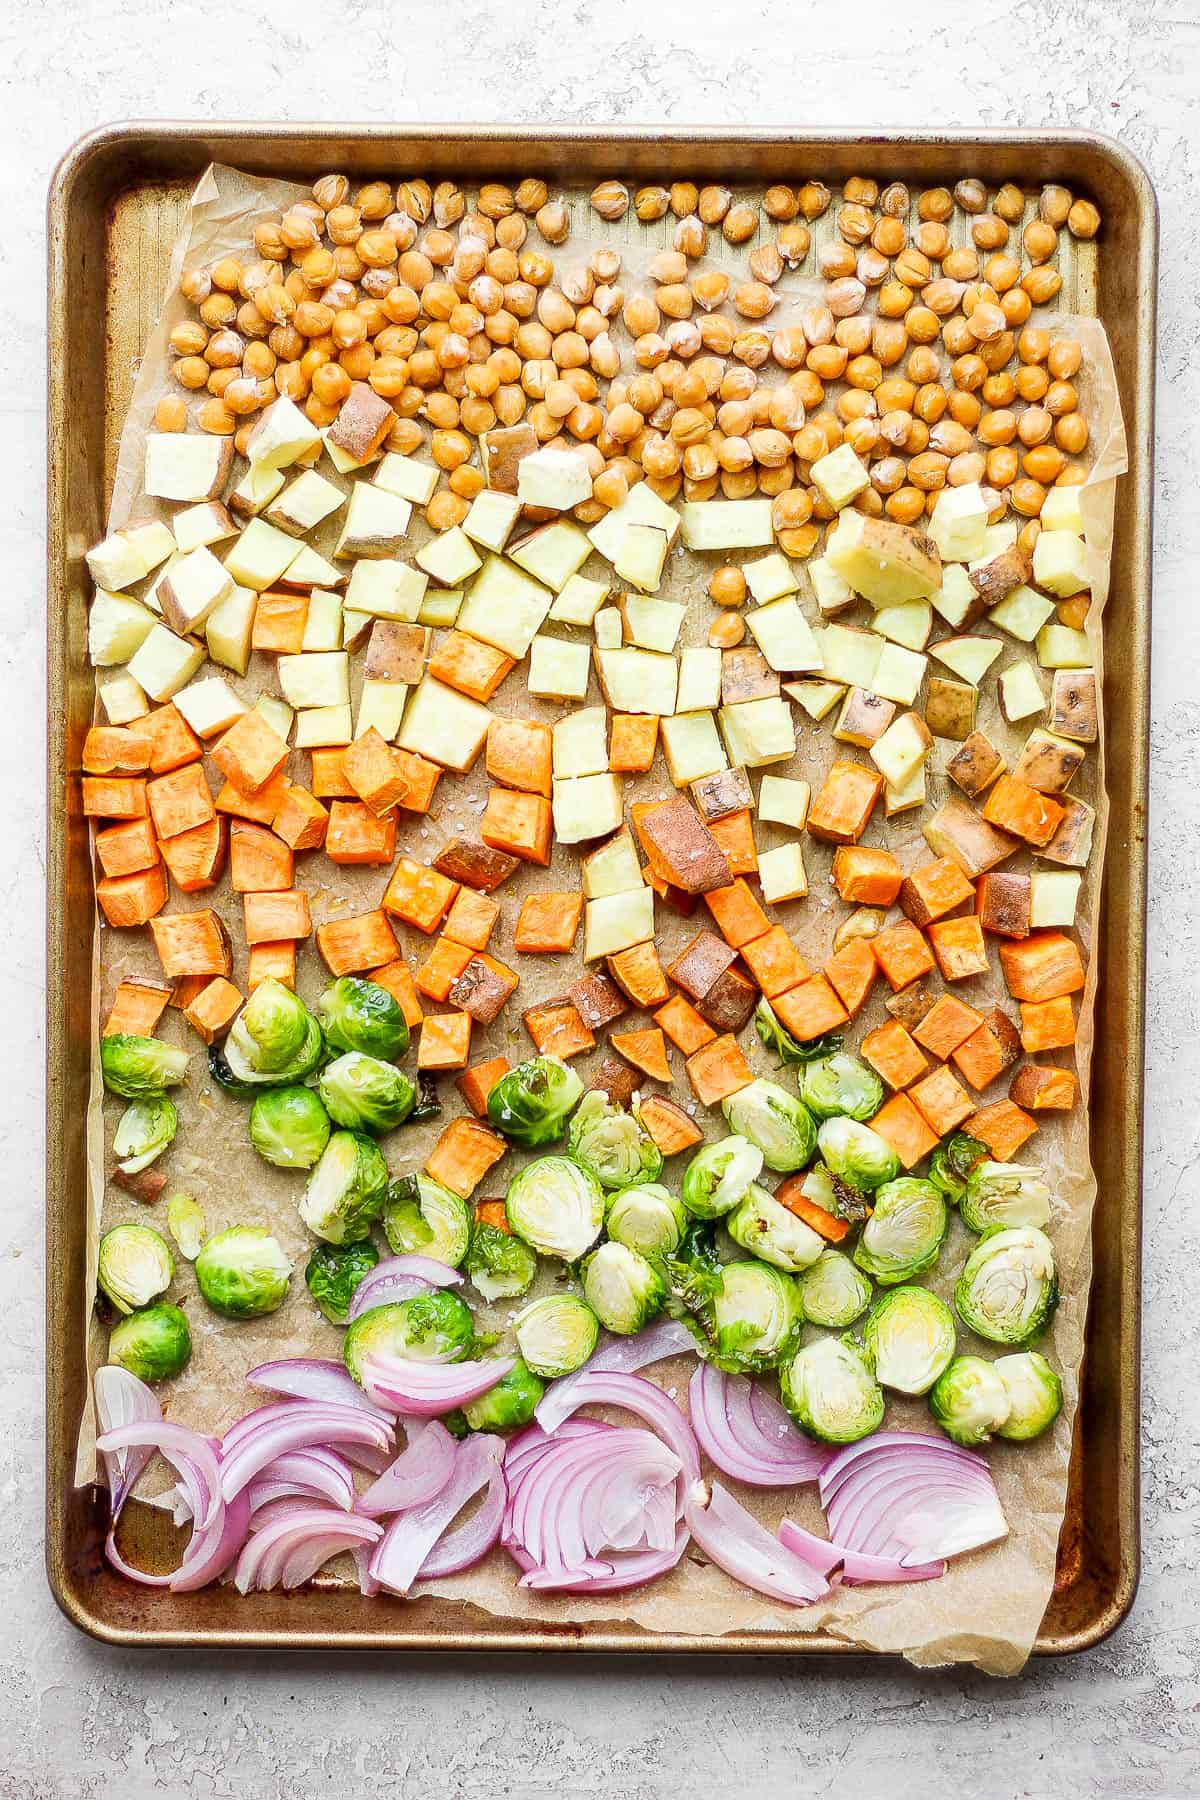 The same baking sheet, now with noticeably roasted yams, sweet potato and chickpeas.  Halved brussels sprouts and sliced red onion have been added to one side of the pan.